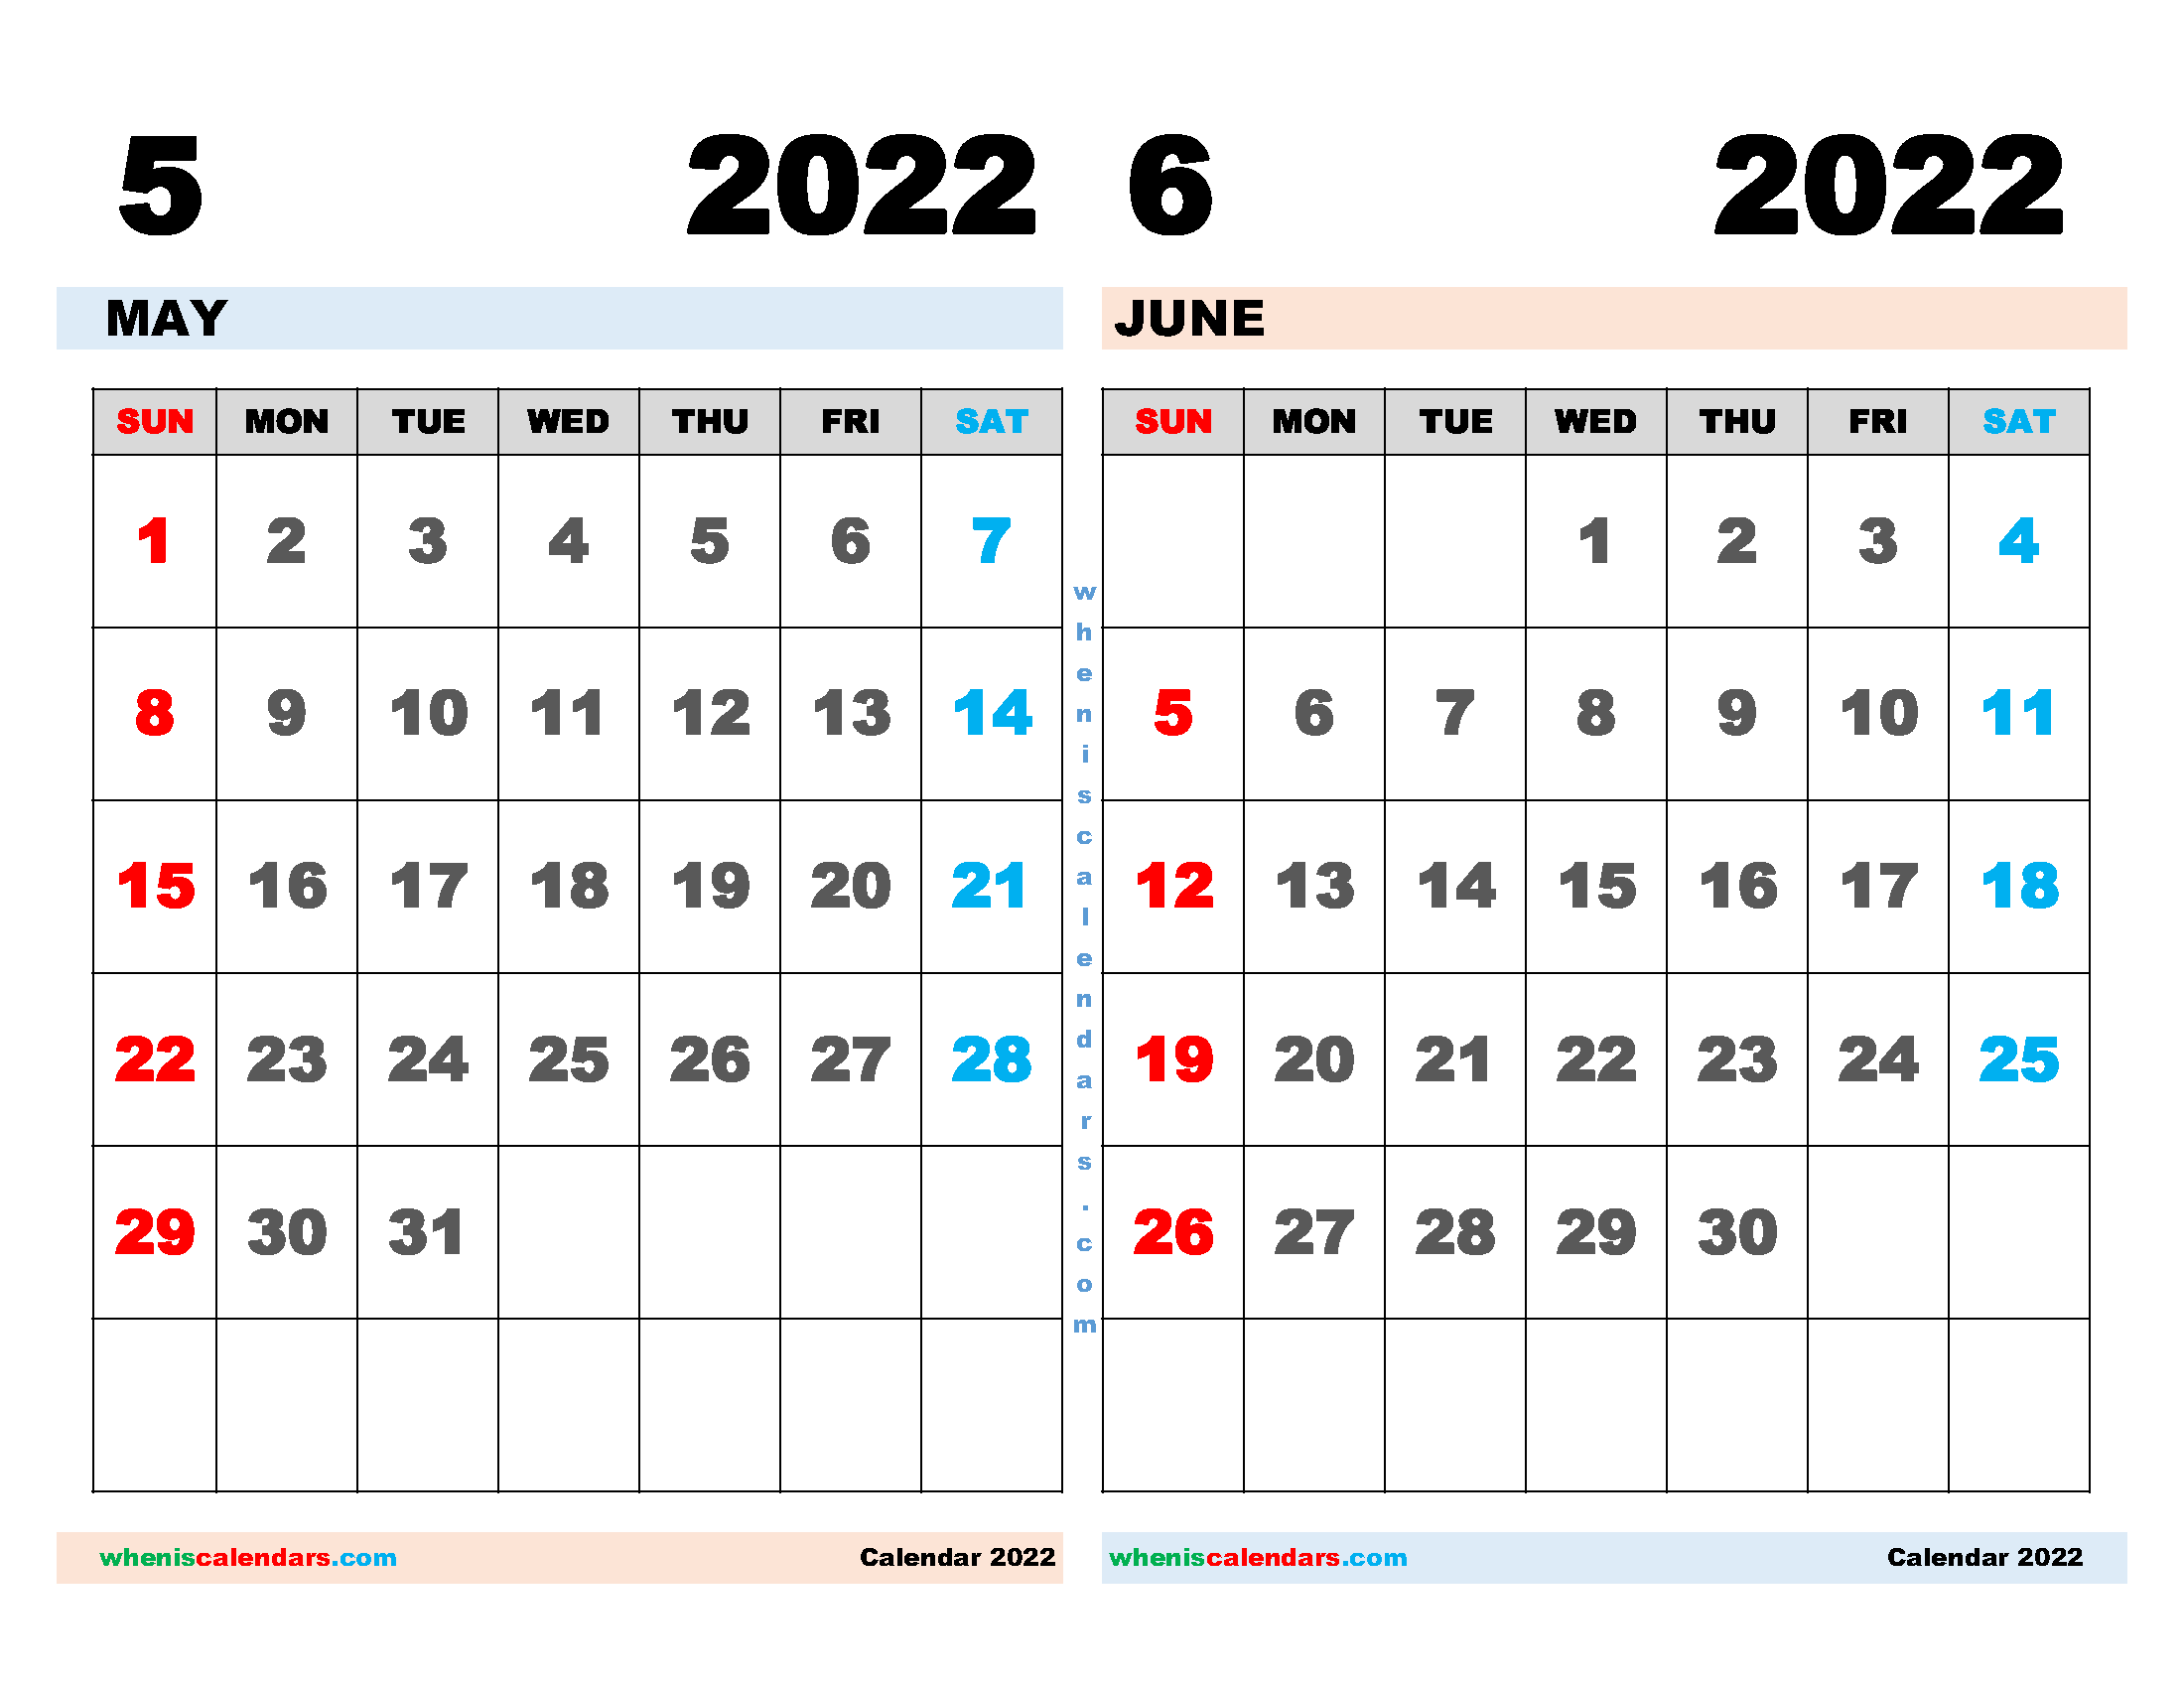 Download Free May and June 2022 Calendar Printable as PDF document and high resolution PNG Image file format (landcape)